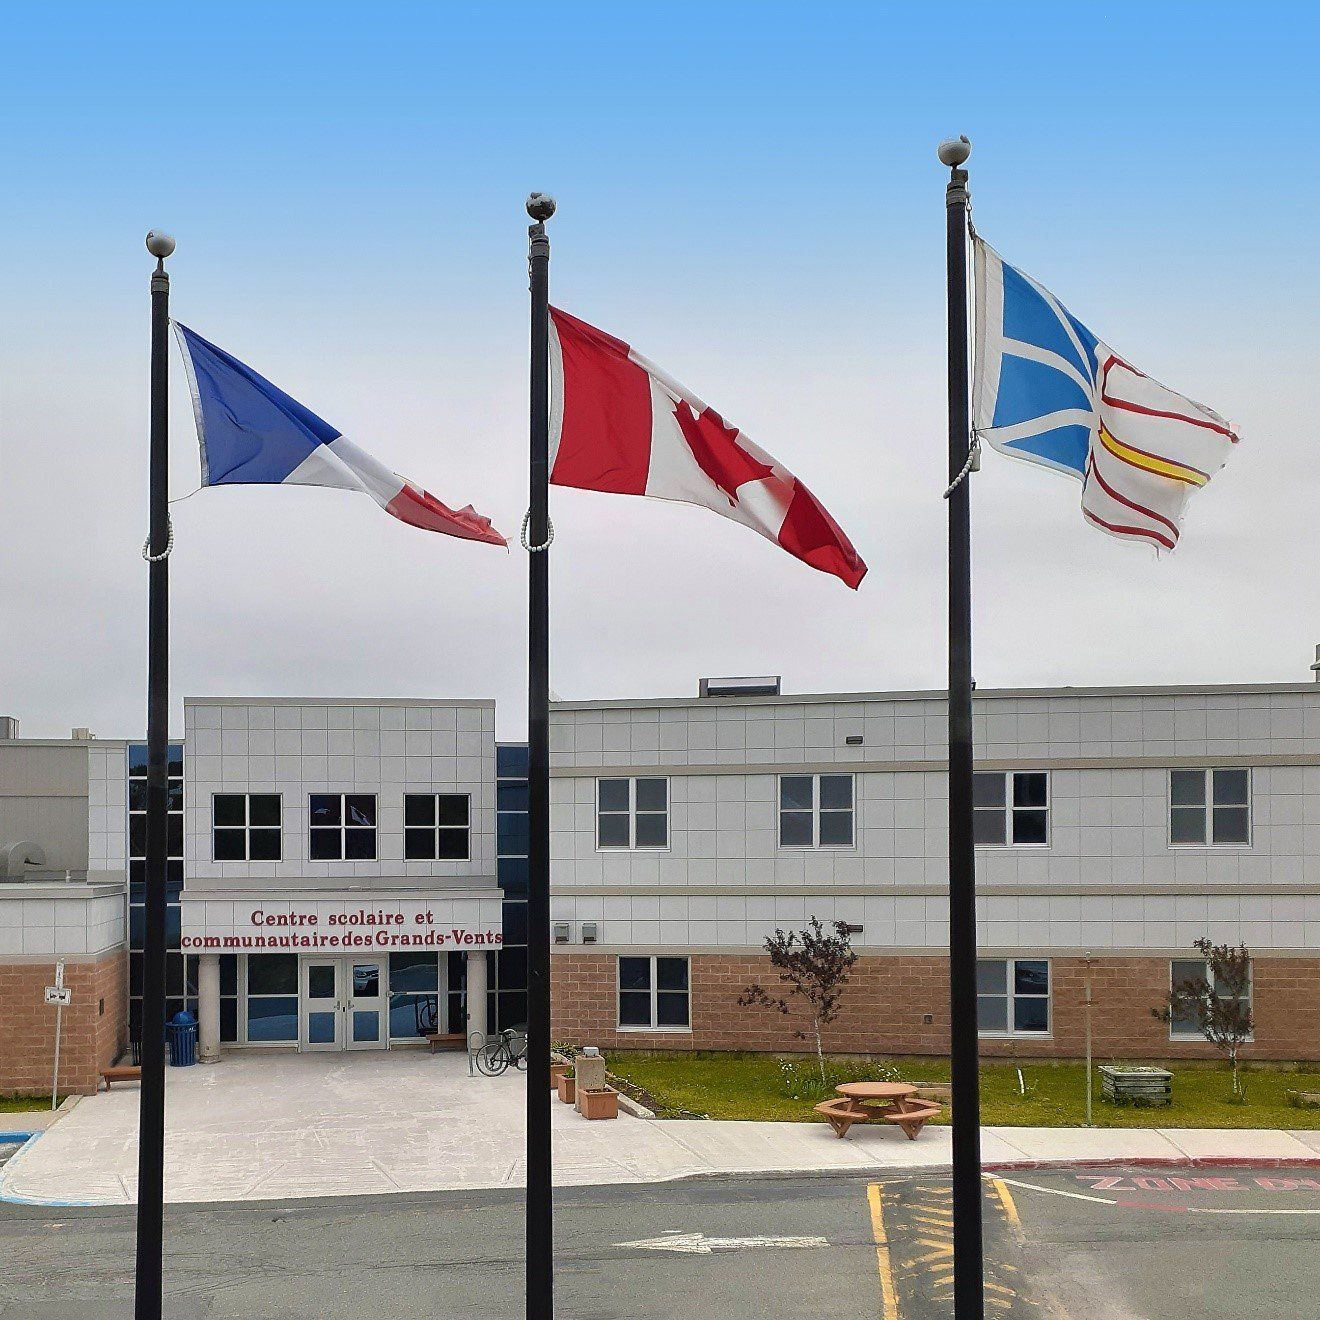 Flags in front of the entrance to the Centre scolaire et communautaire des Grands-Vents.